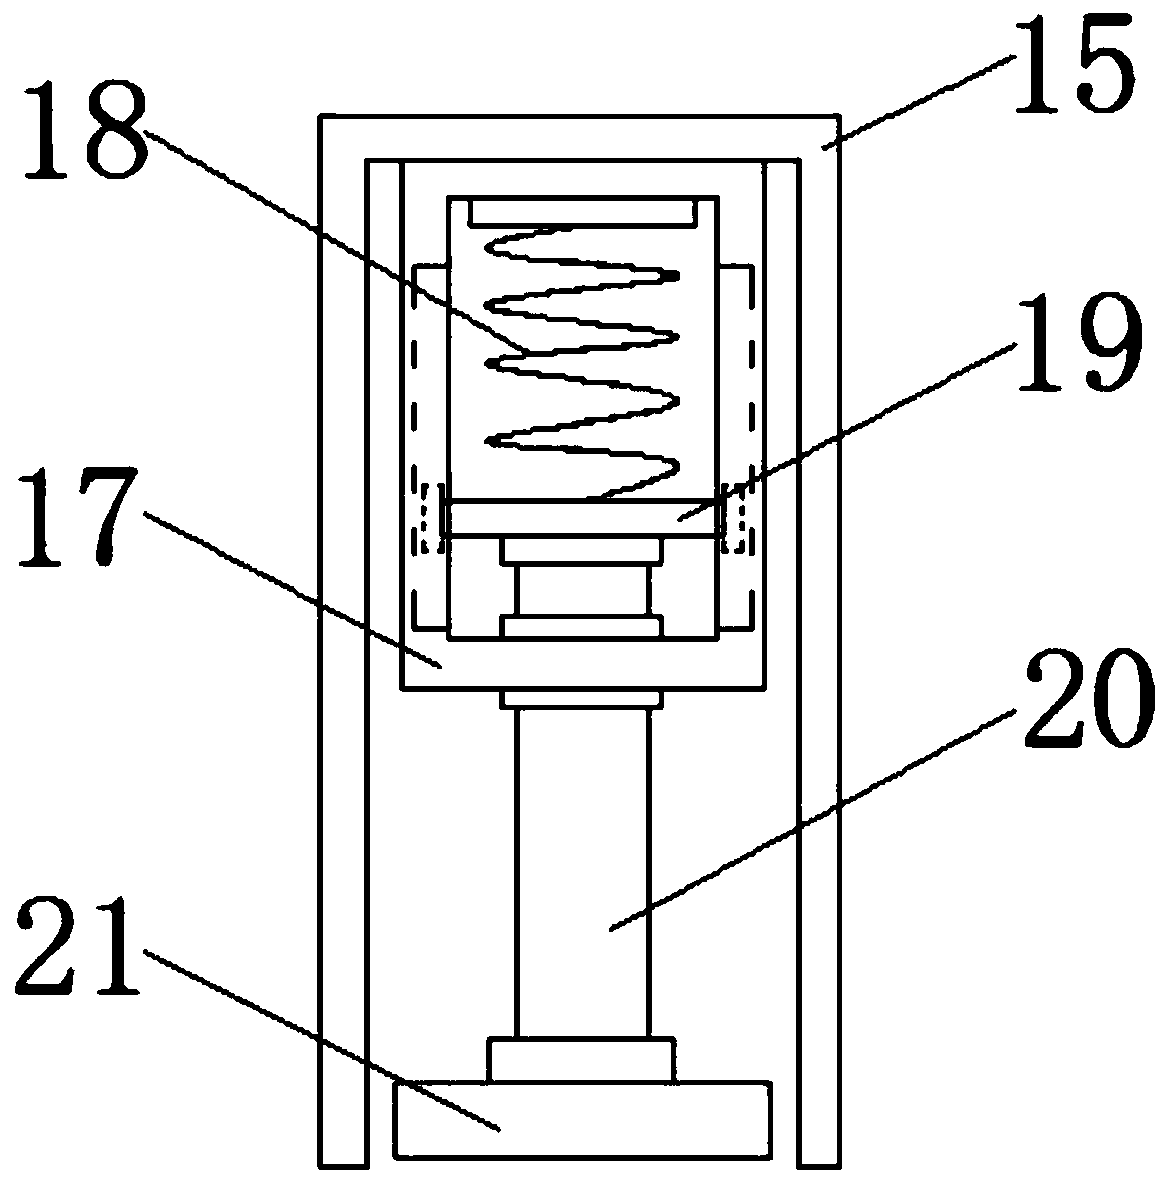 Sampling device for detection of road engineering